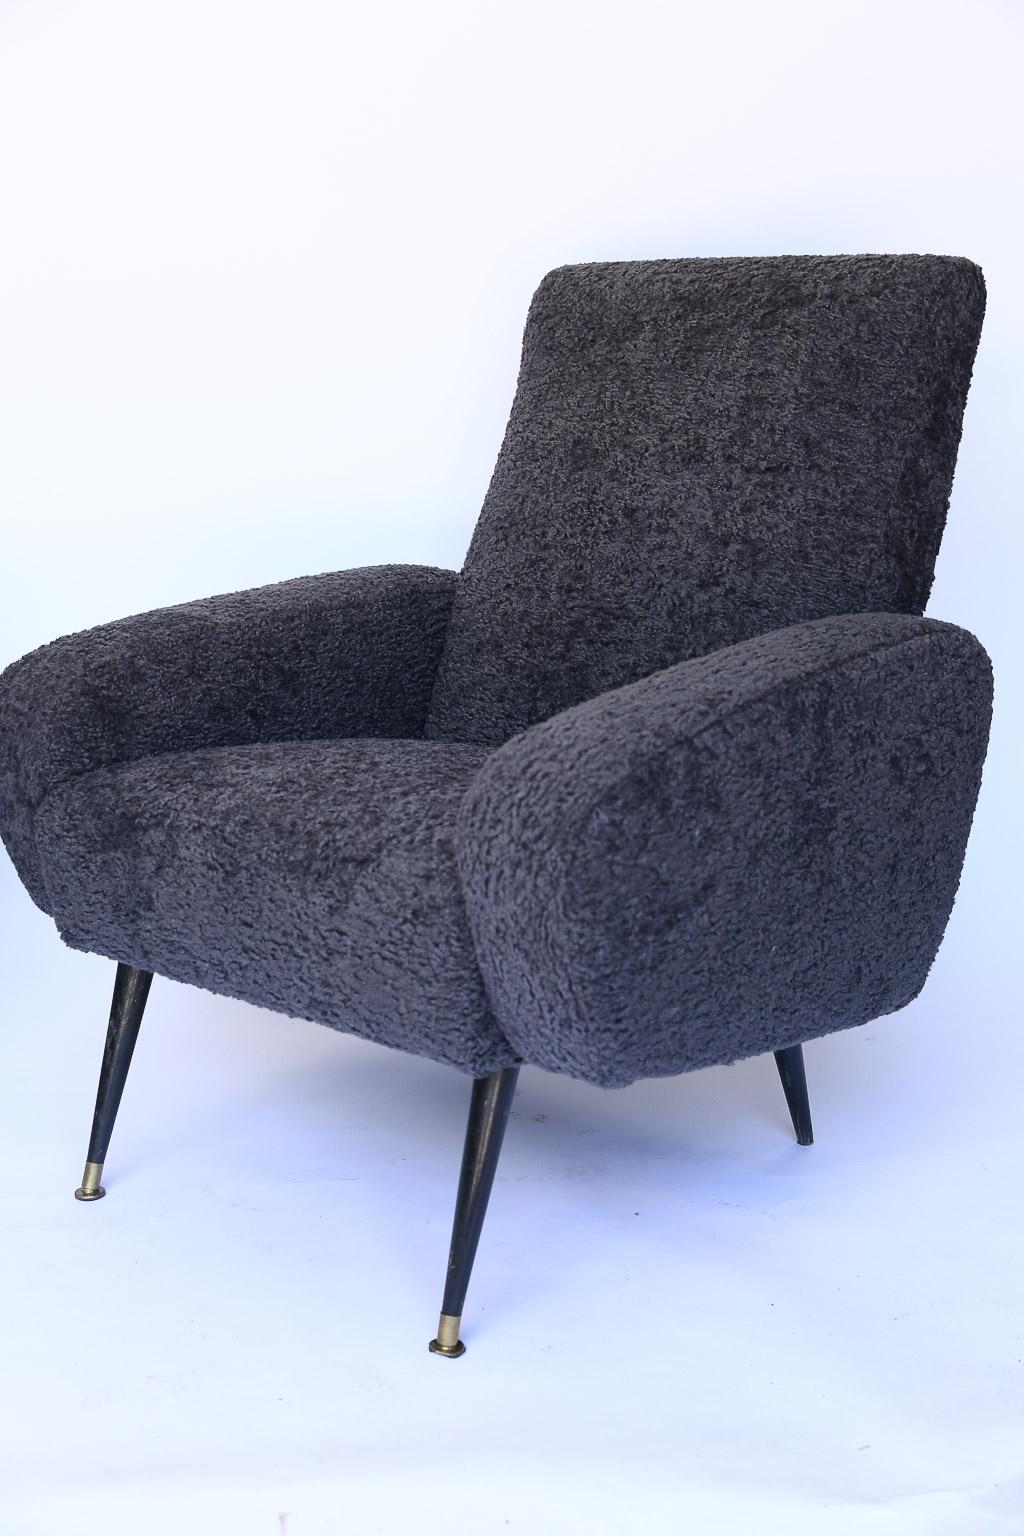 This pair of Mid-Century Modern Italian armchairs in the style of Marco Zanuso have been newly upholstered in Lee Industries Sherpa Coal fabric. The legs of the chairs are made of tapered wood; the front legs have a brass 